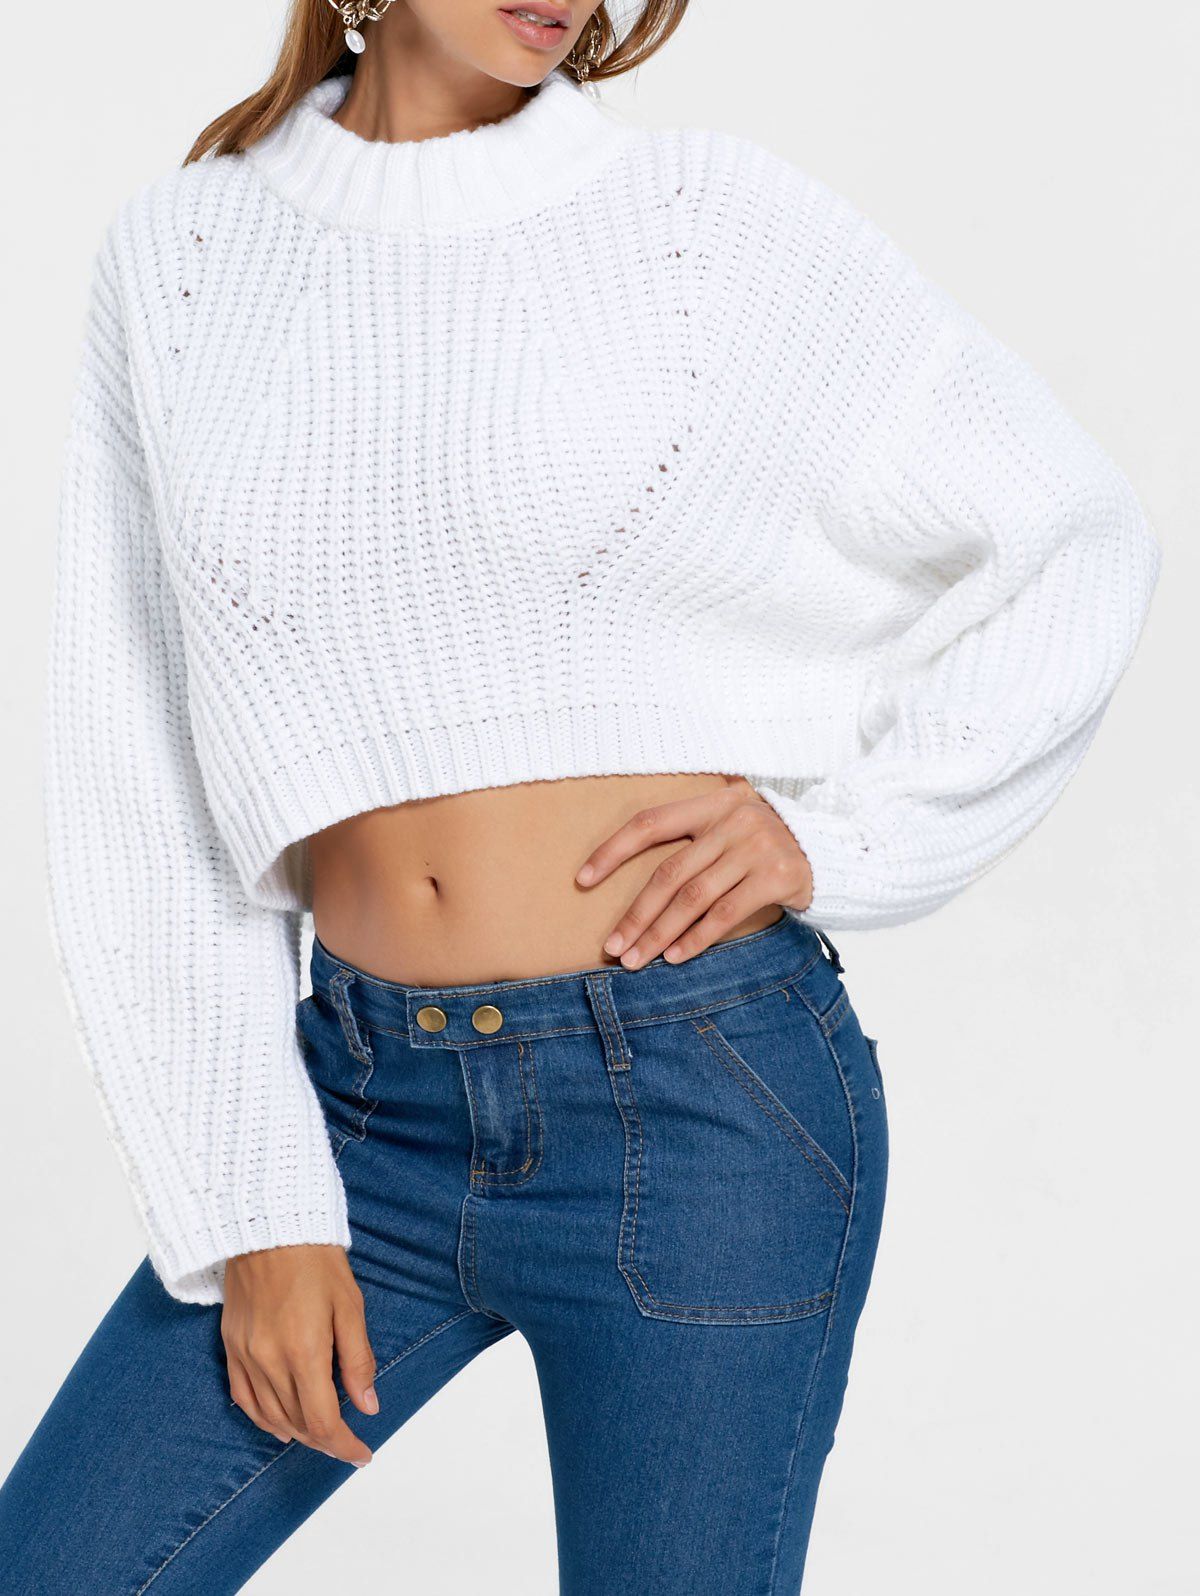 Batwing Sleeve Crop Sweater - WHITE S